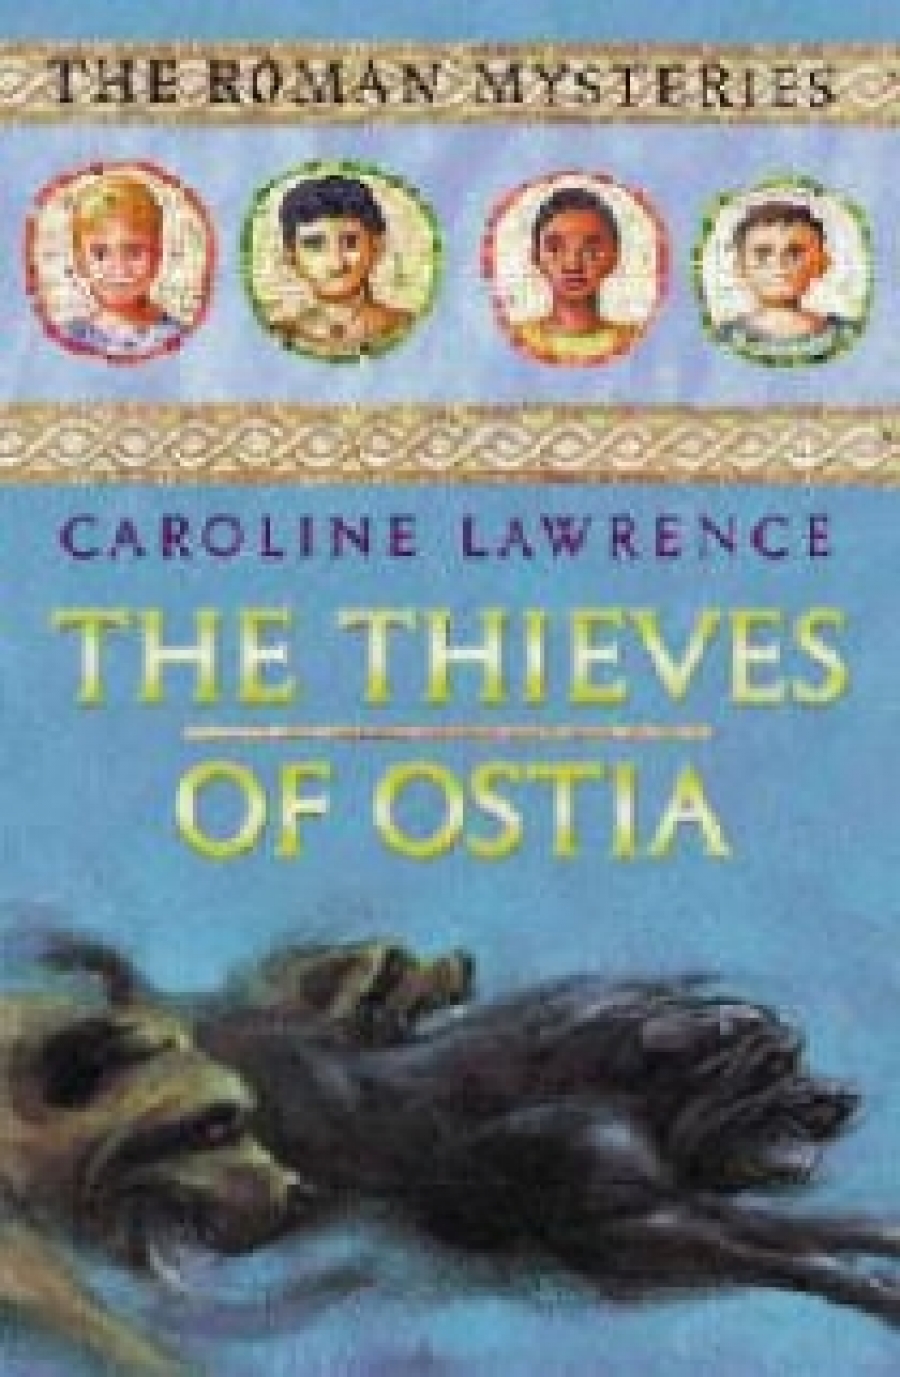 Lawrence, Caroline The Thieves of Ostia (The Roman Mysteries) 